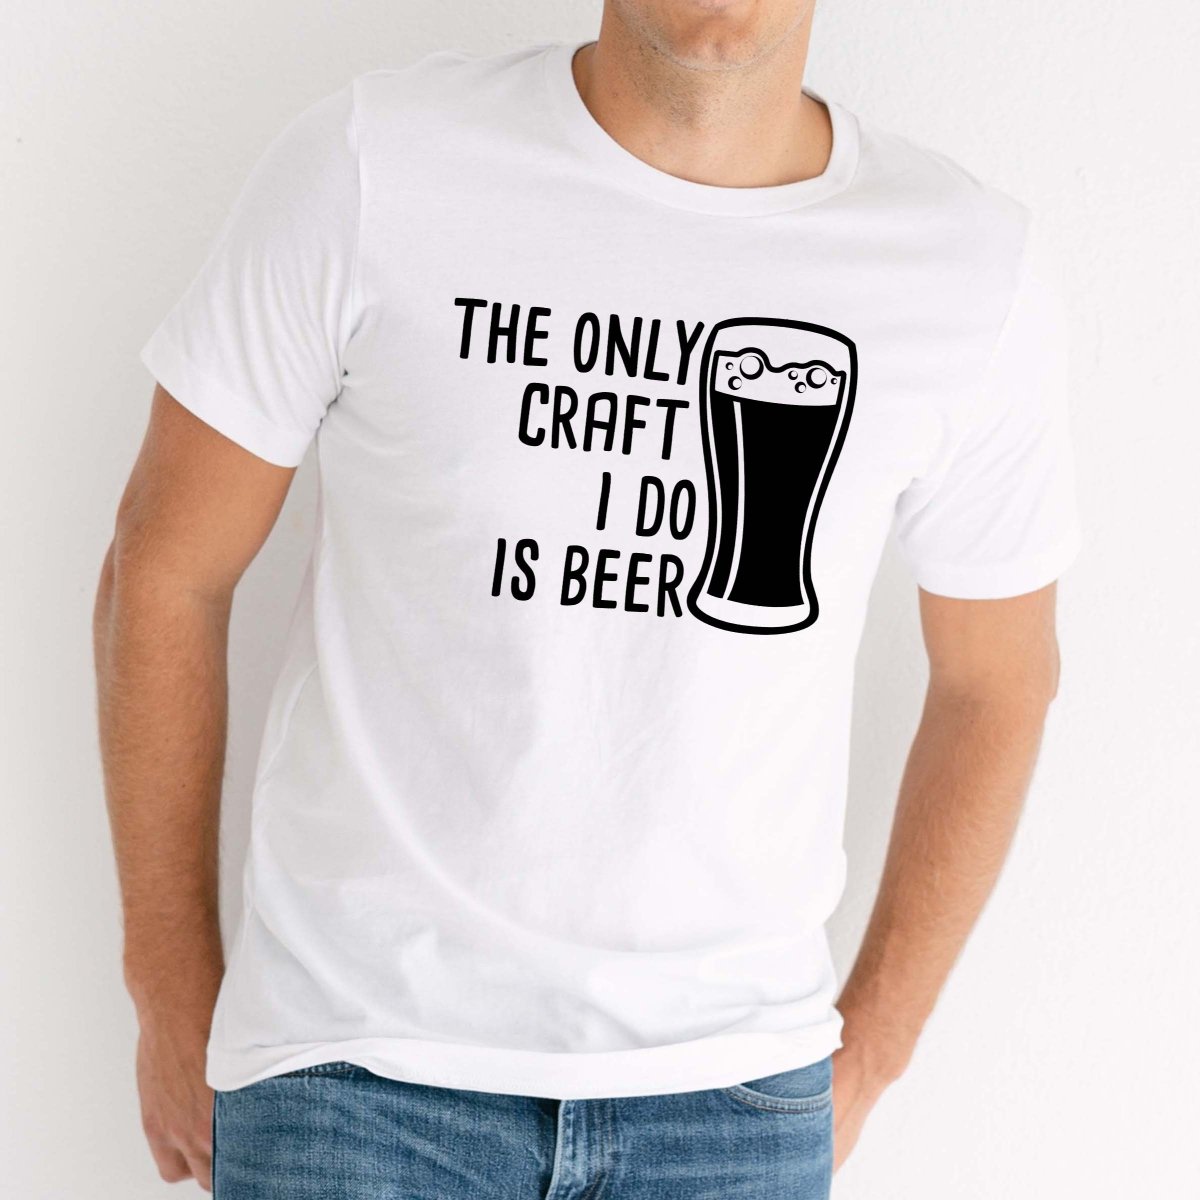 Only Craft I Do Is Beer Tee and Hat Bundle - Limeberry Designs